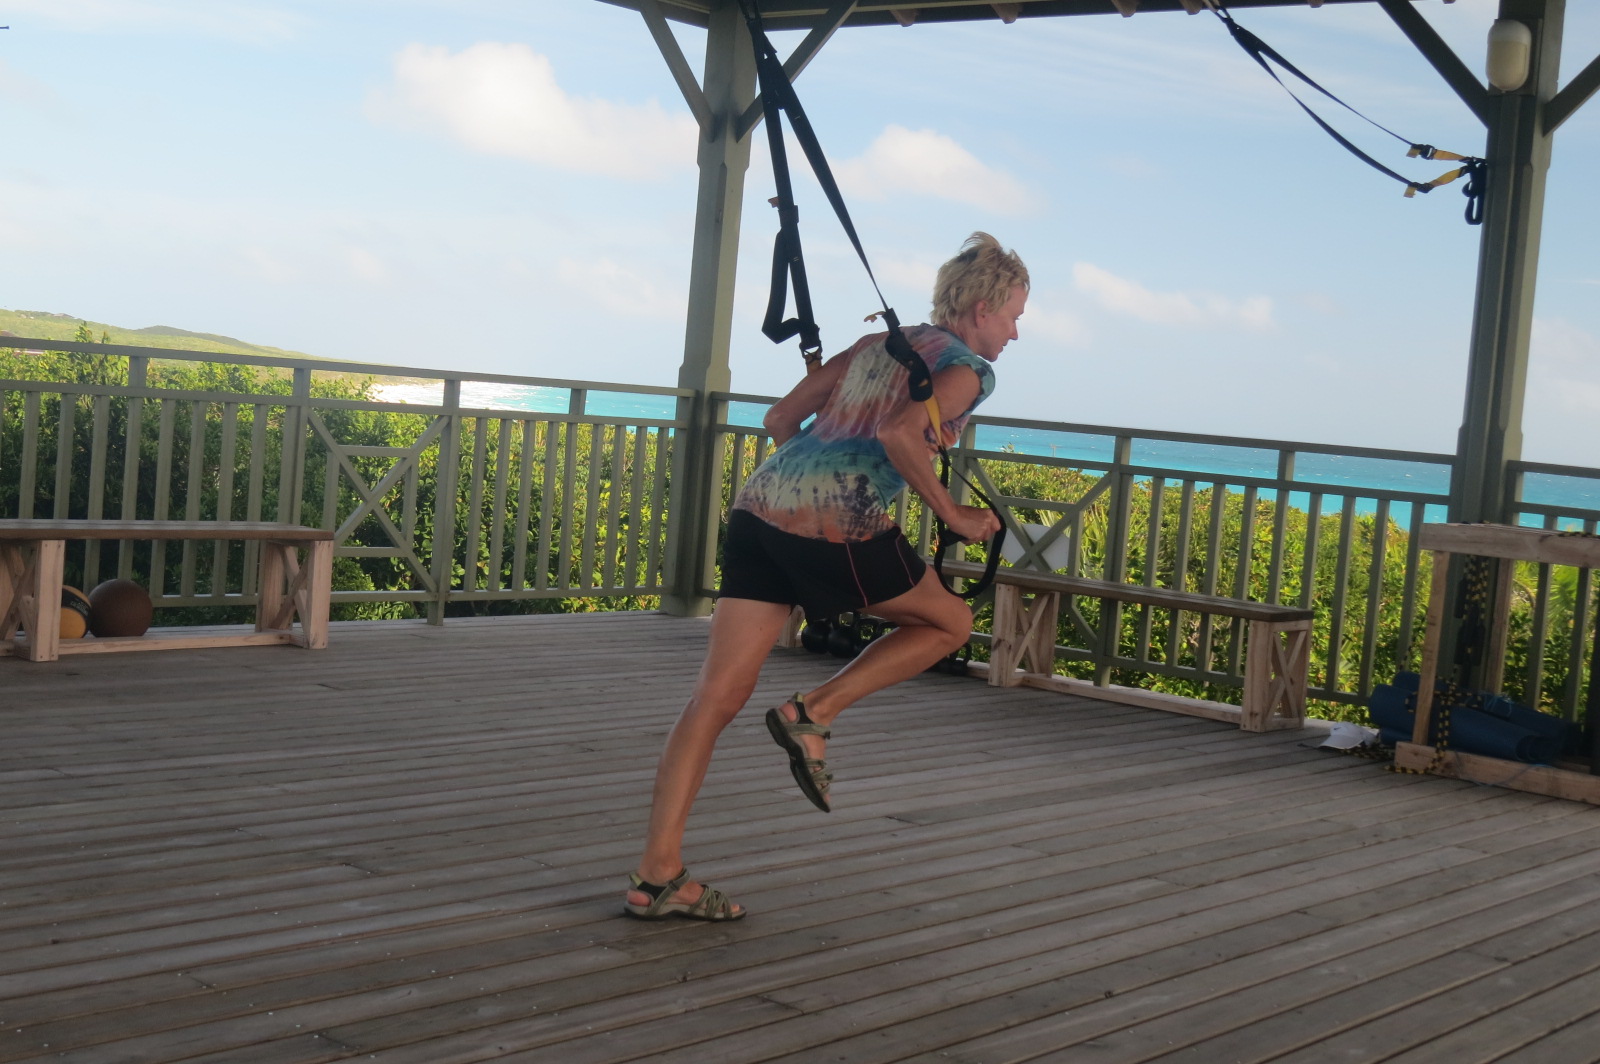 Doing TRX at the Open Air Gym